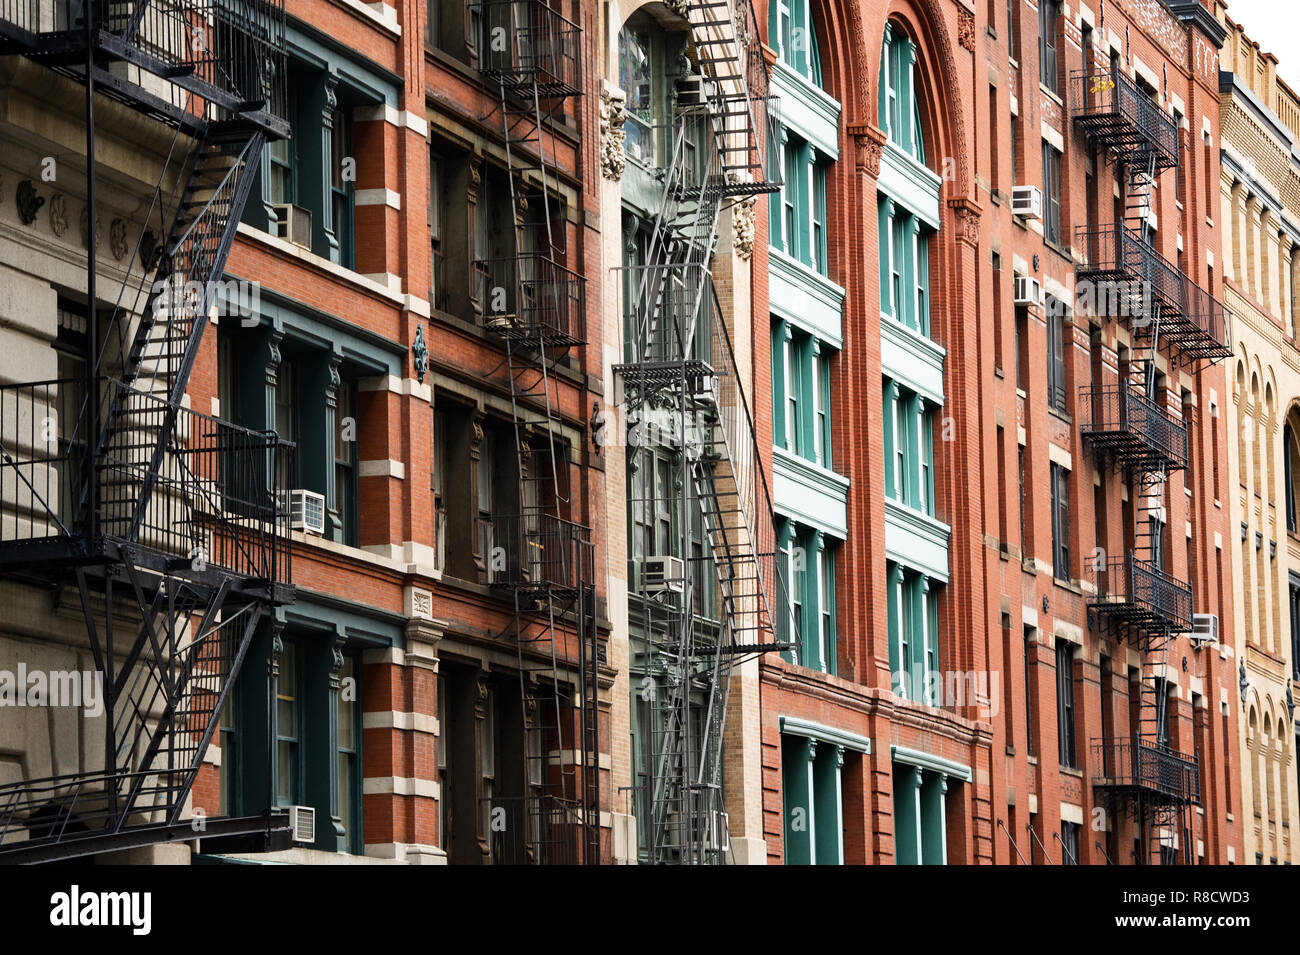 Close-up view of New York City style apartment buildings with emergency stairs along Mott Street in Chinatown neighborhood of Manhattan. Stock Photo